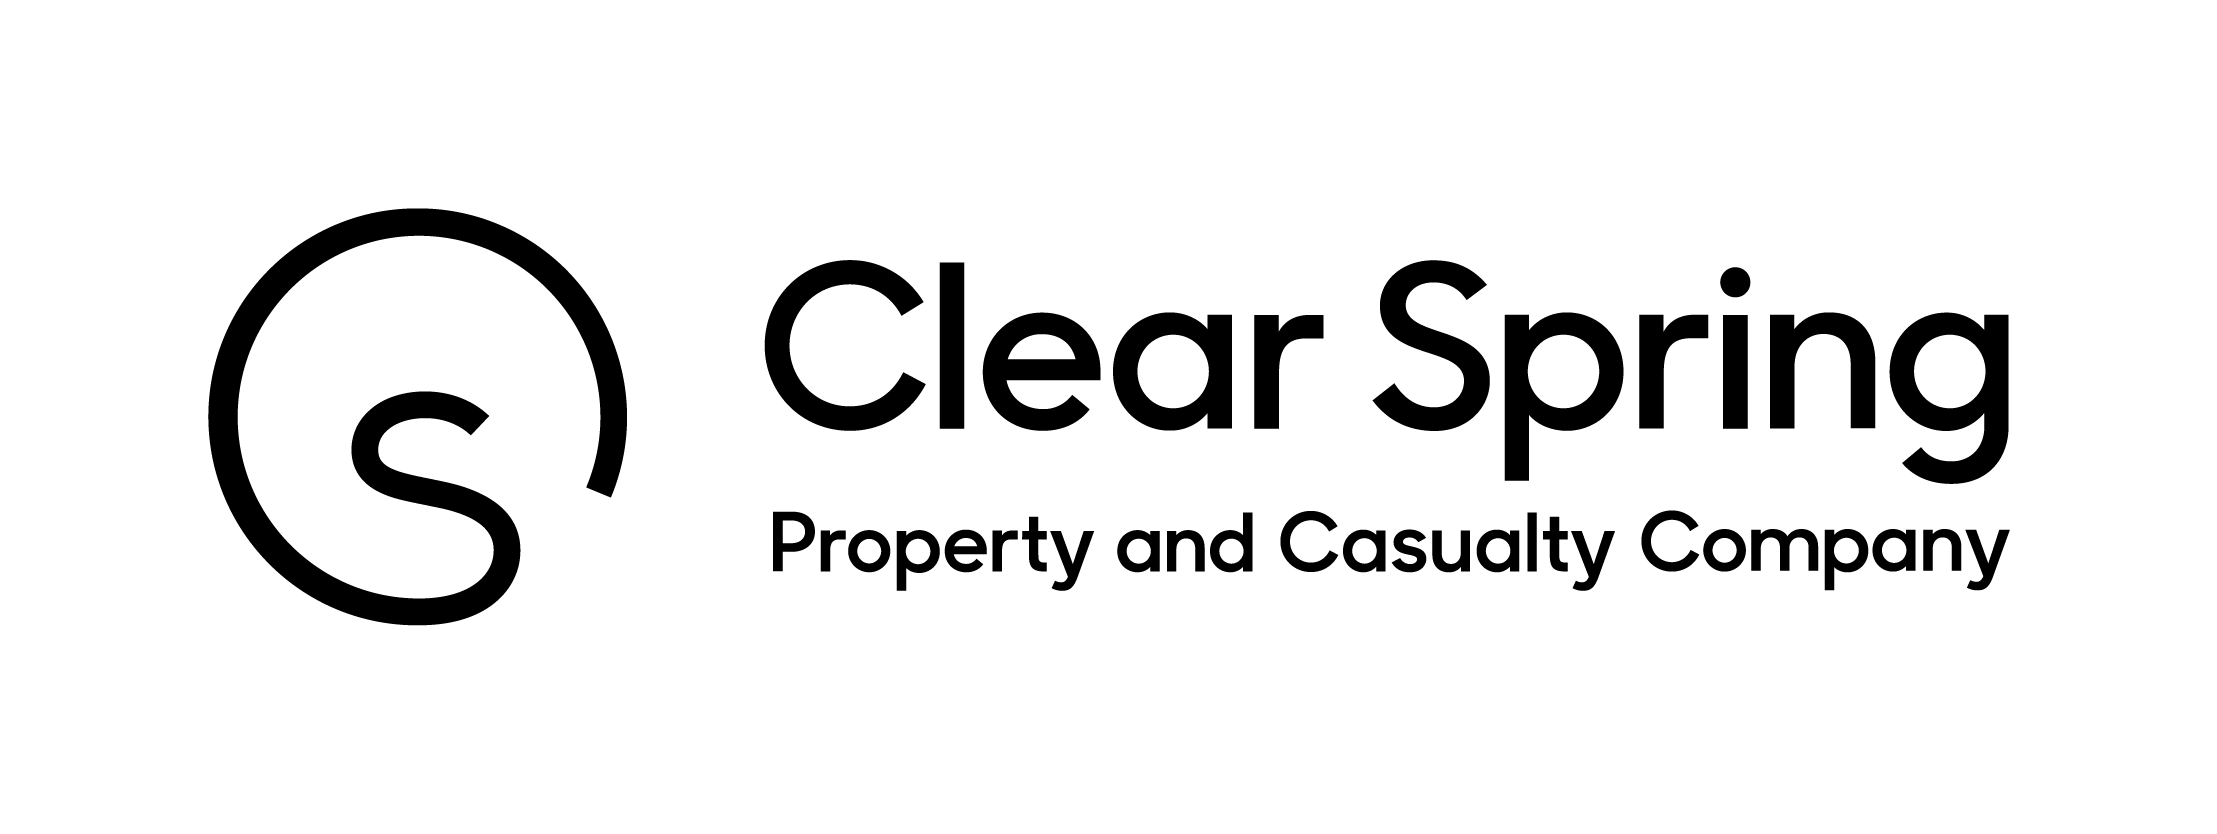 Clear Spring Property and Casualty Company